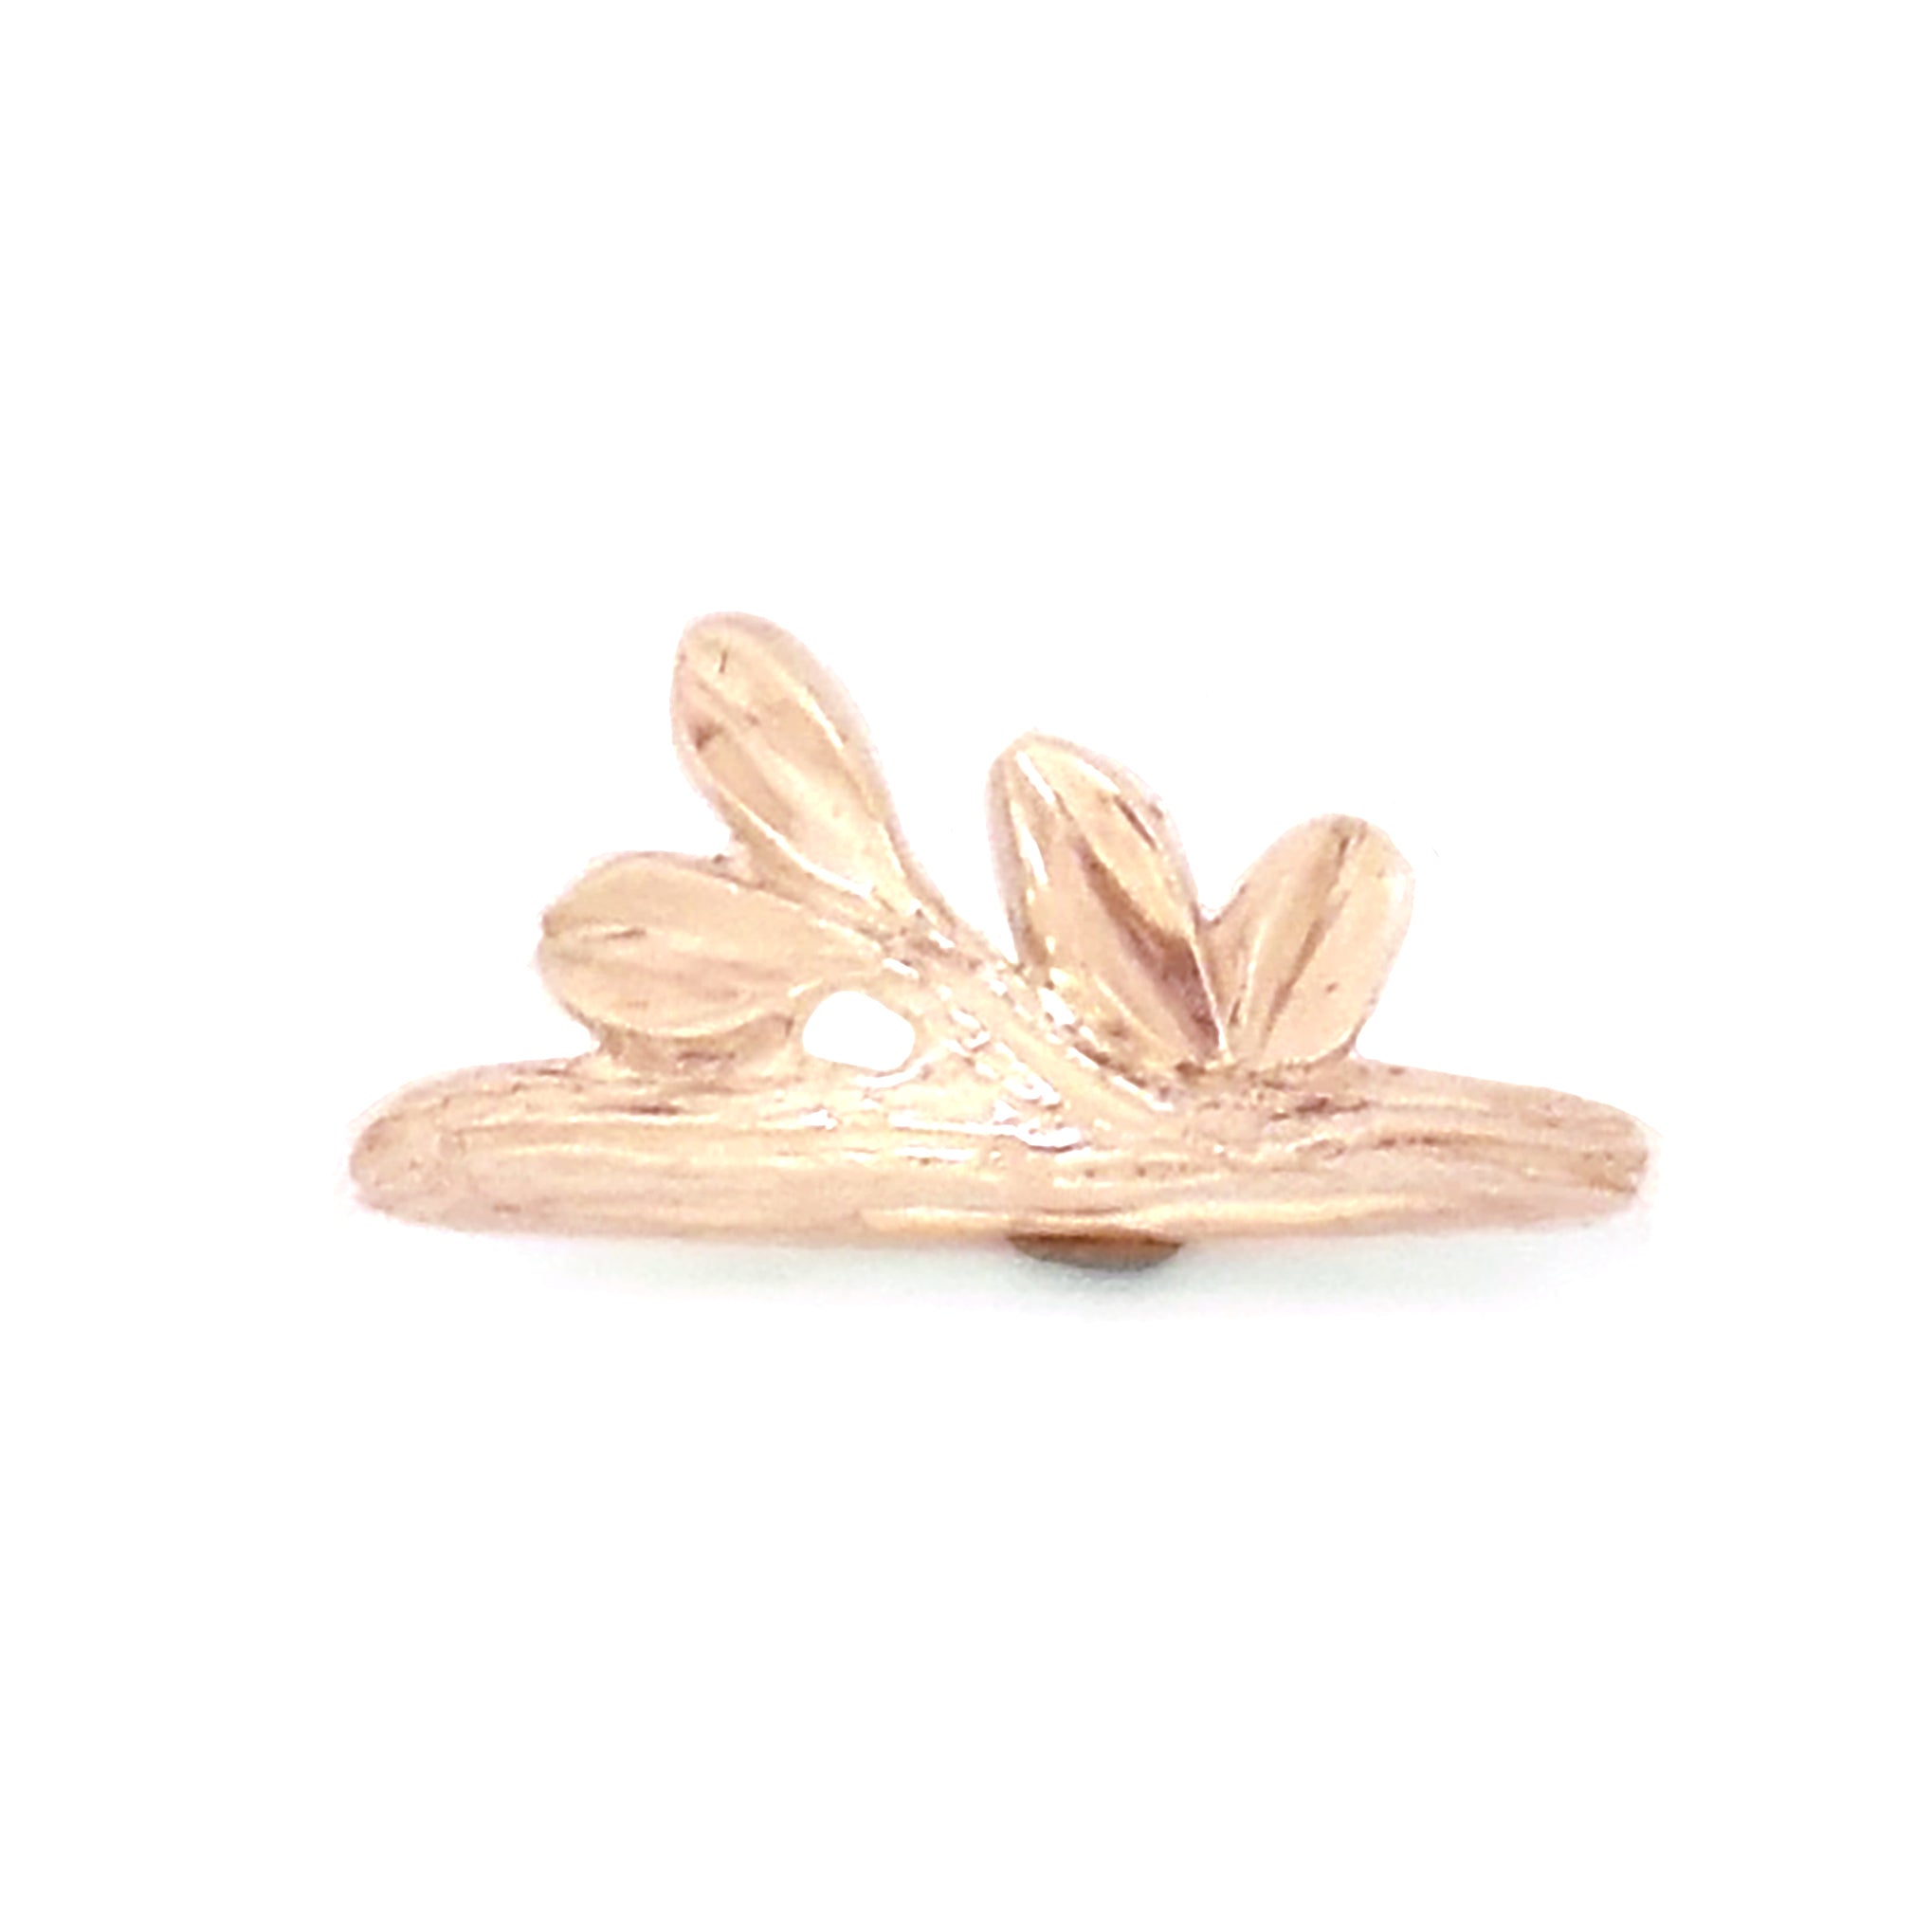 Gold Growing Love Twig Ring - your choice of gold - Wedding Ring 14K Yellow Gold 18K Palladium White Gold 6355 - handmade by Beth Millner Jewelry